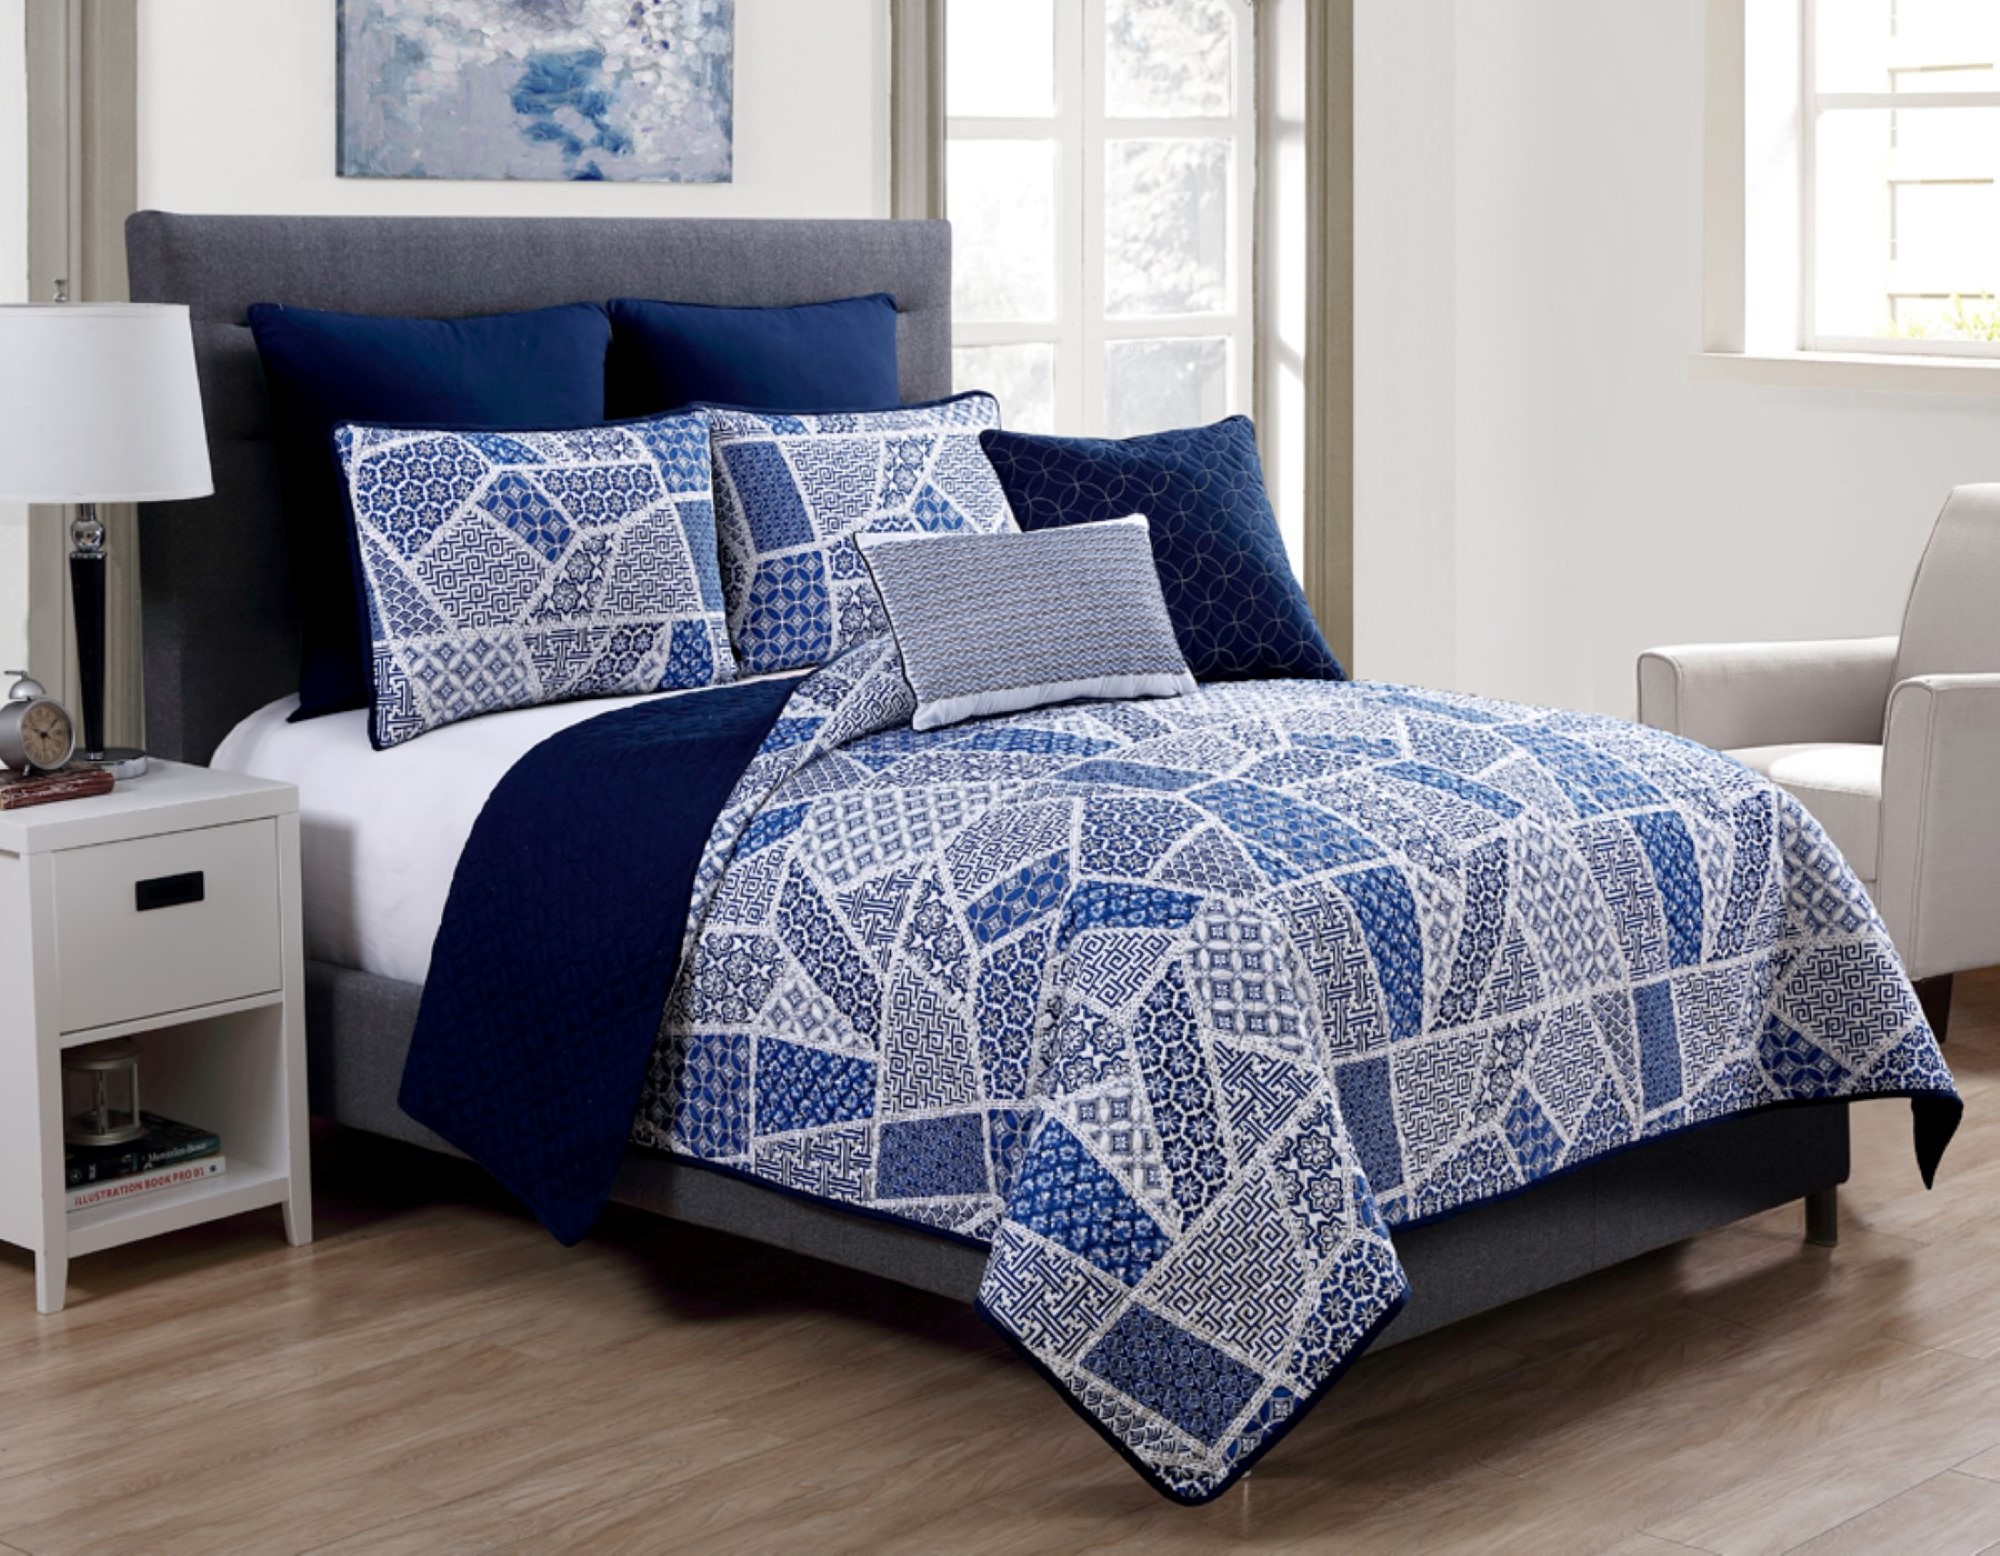 VCNY Home Ladera 7PC QUILT SET